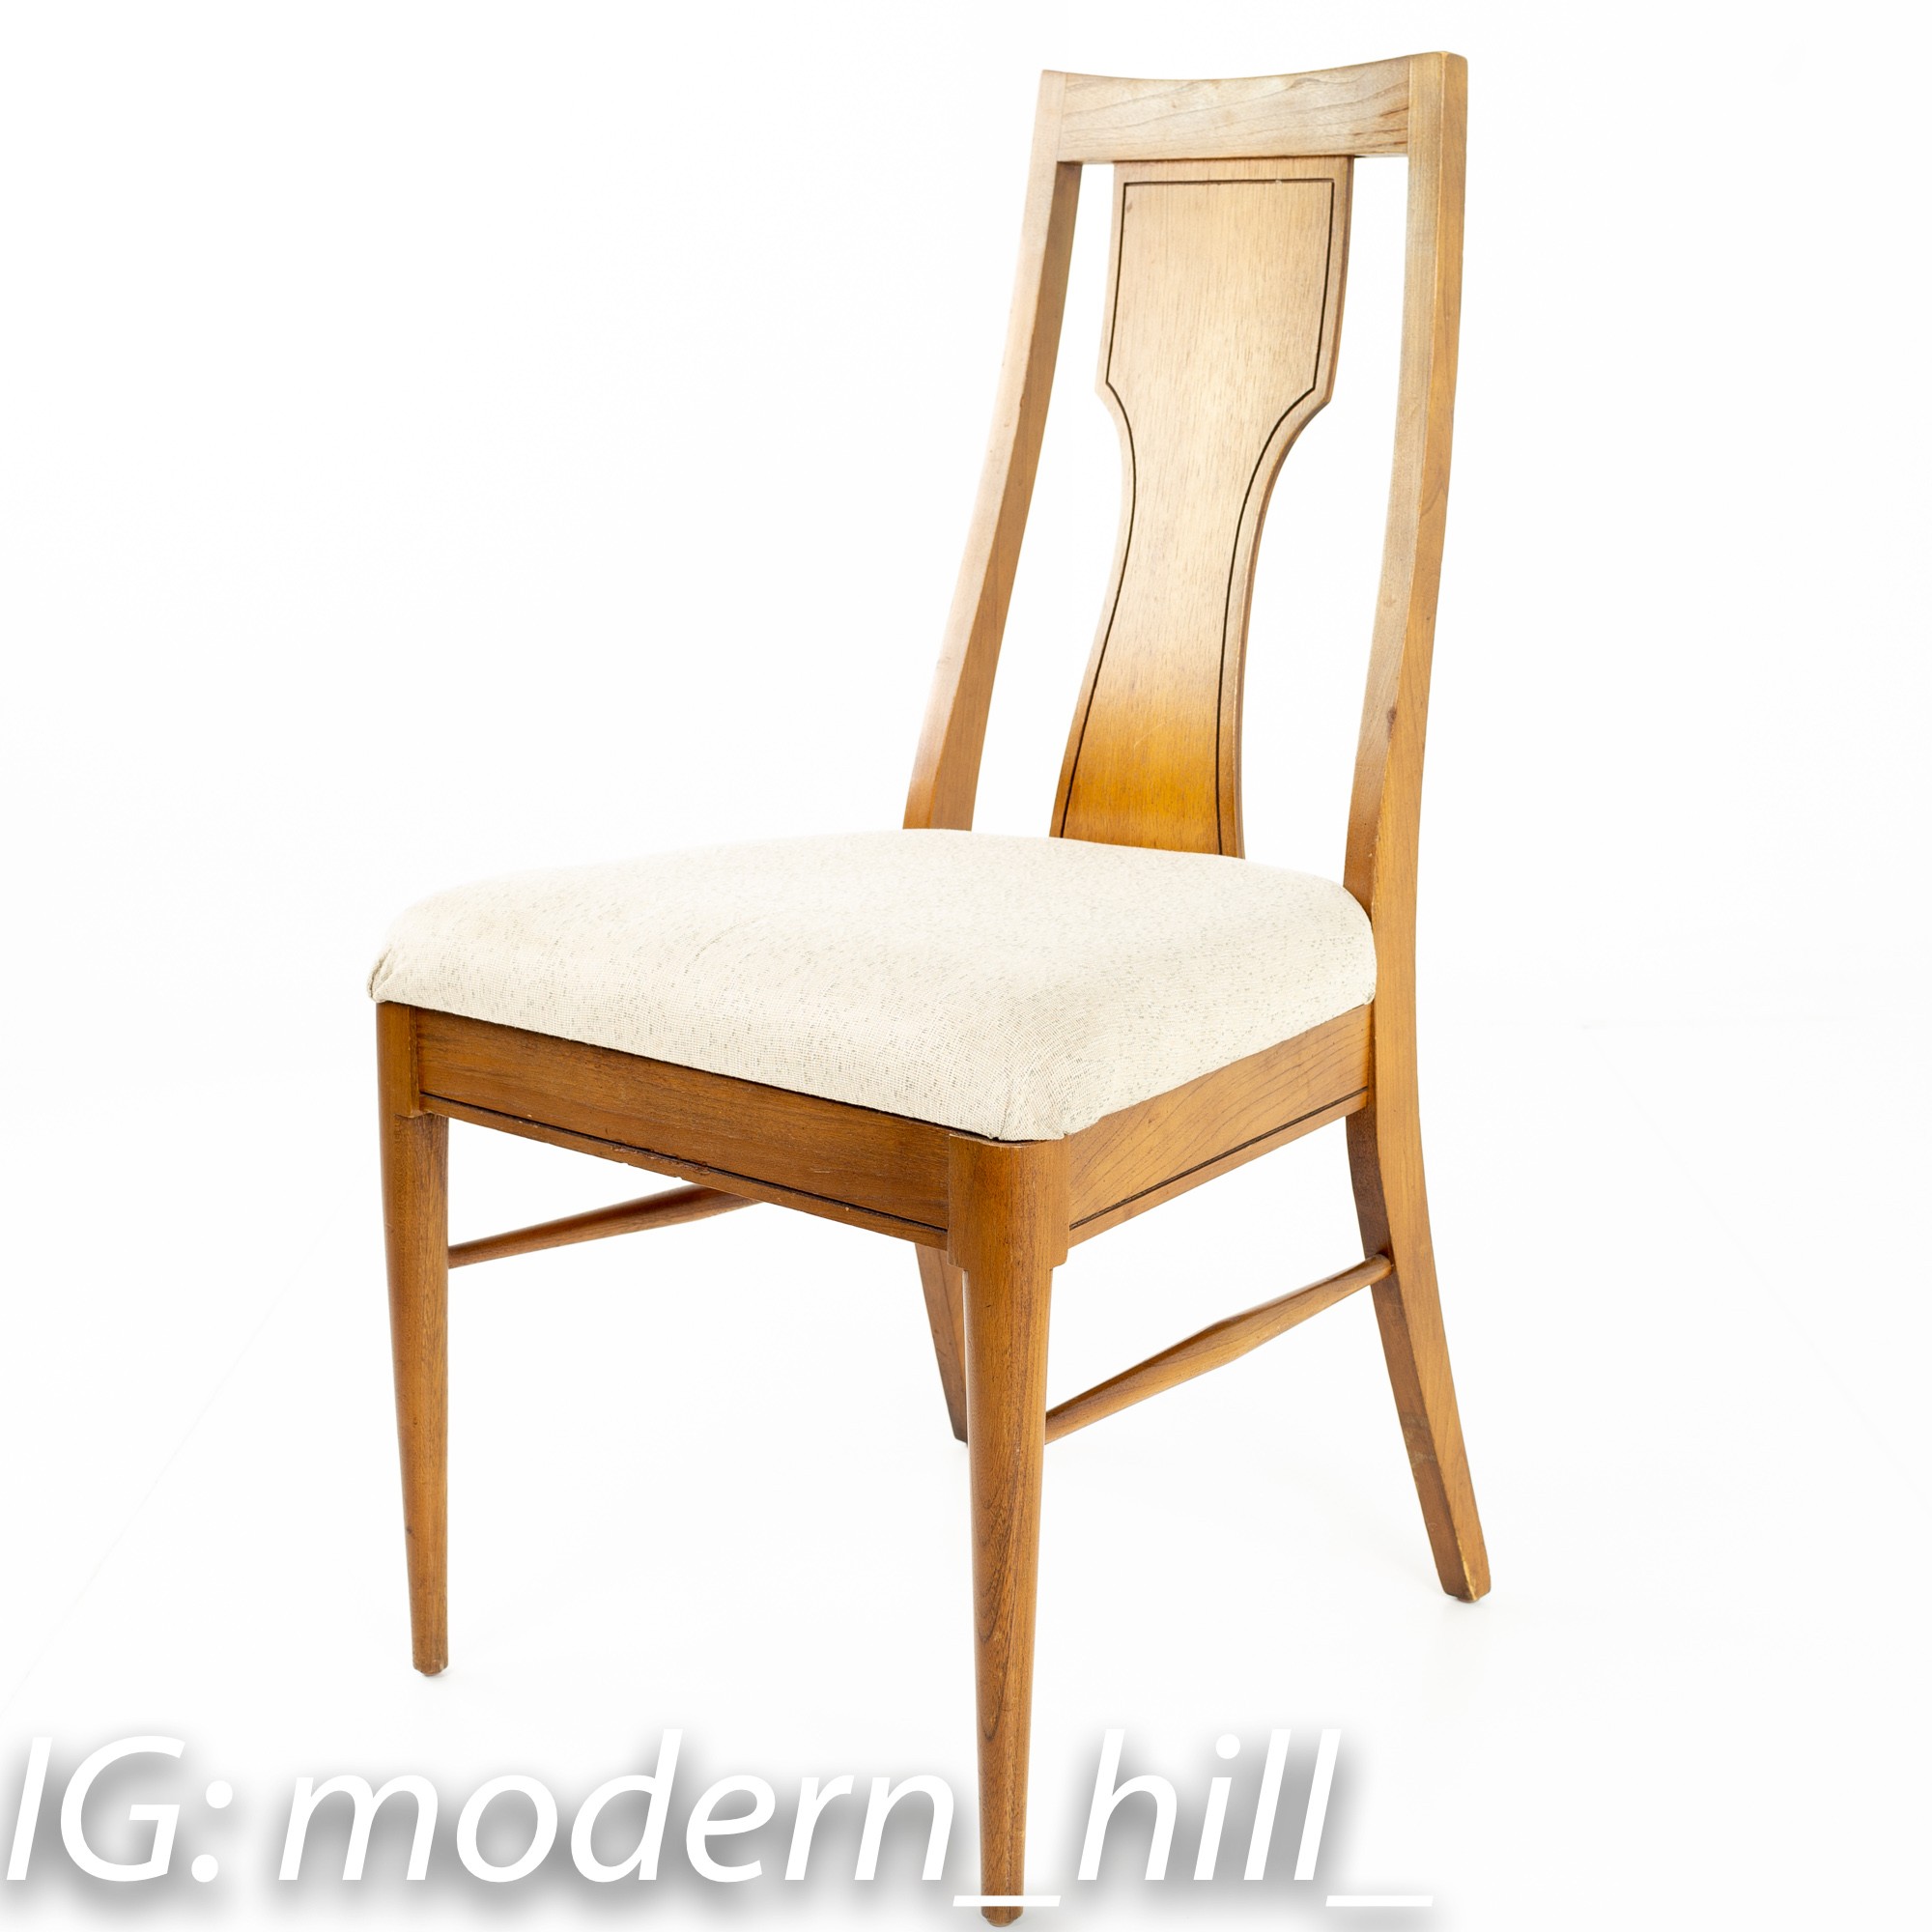 Broyhill Style Mid Century Modern Dining Chairs - Set of 6